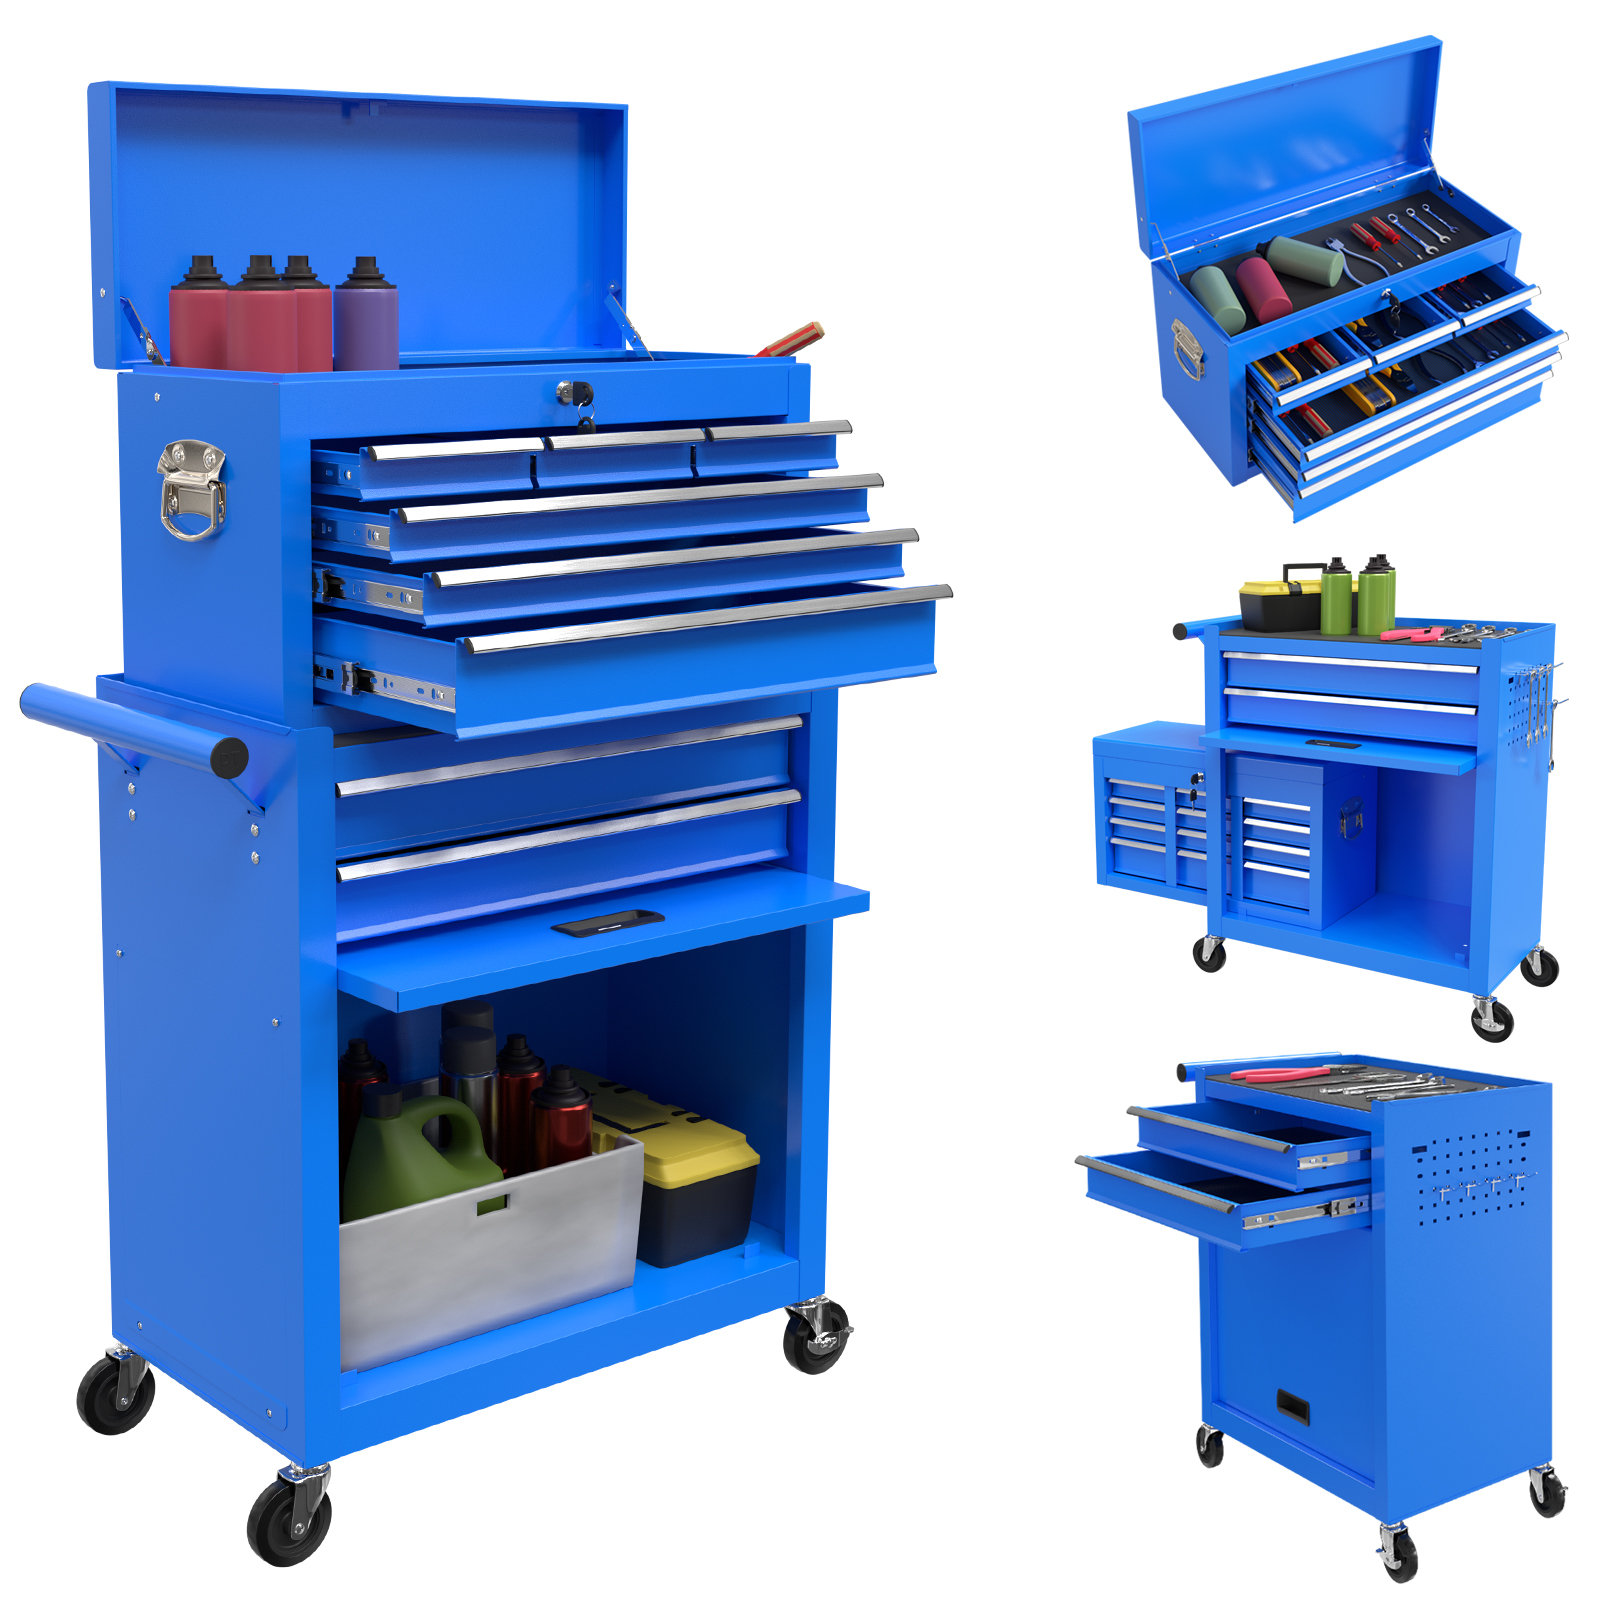 WORKPRO 5-Drawer Rolling Tool Chest, Sliding Metal Drawer Rolling Too